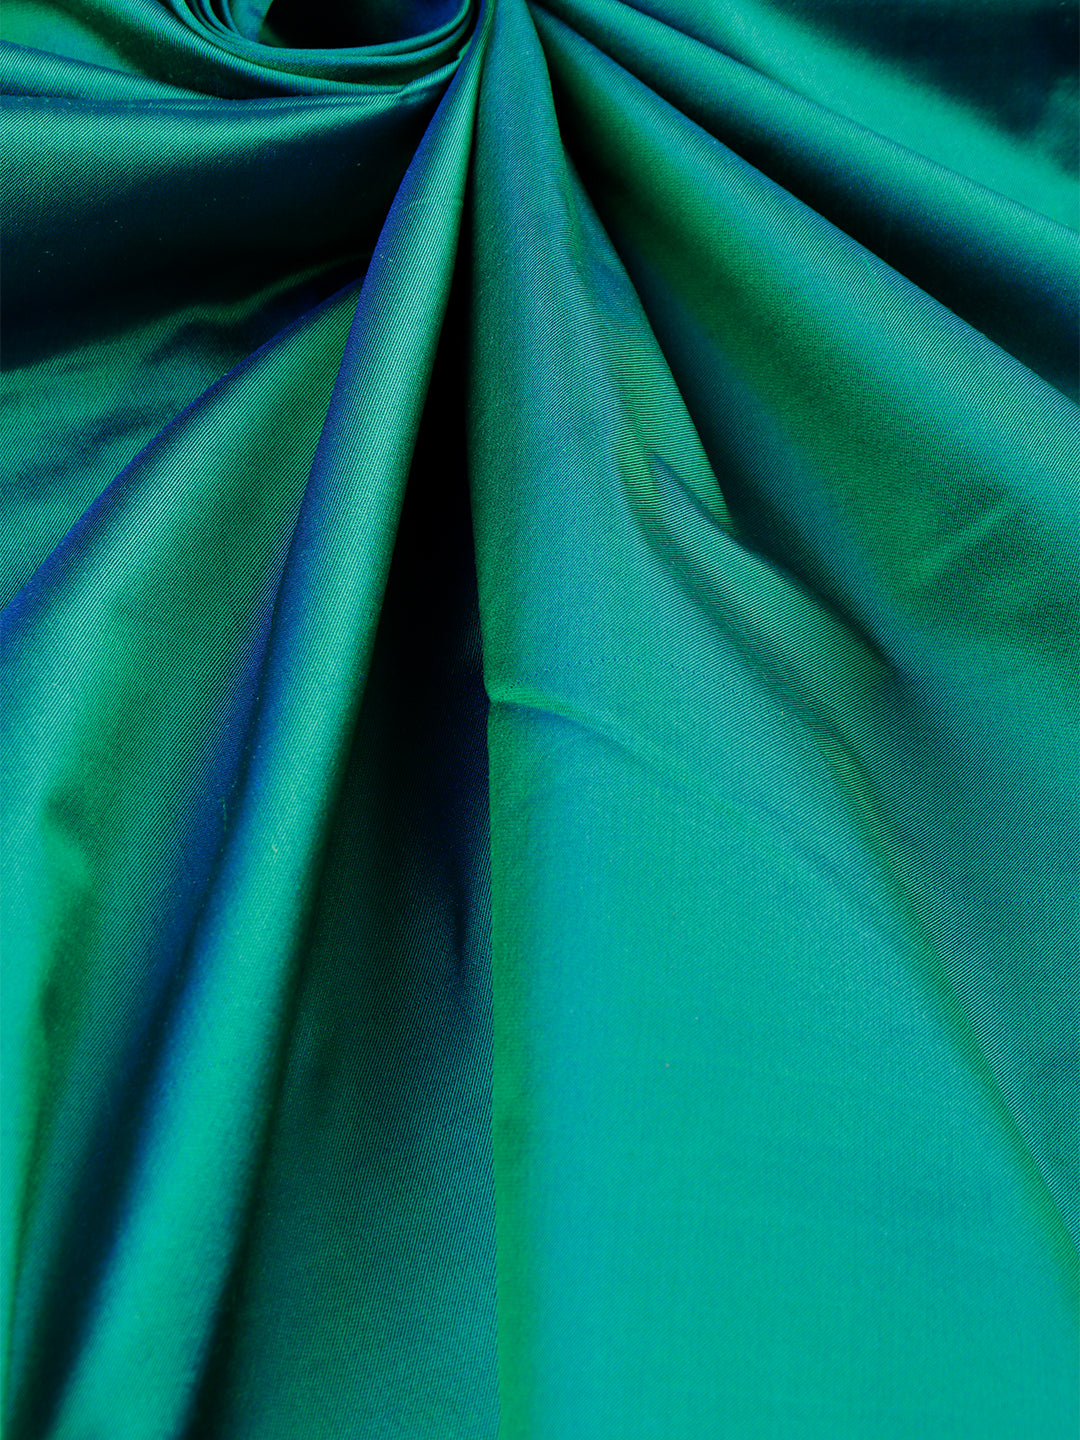 Mens Plain Double Shade Peacock Green Satin Pure Silk 10 Meter Shirt Fabric-Pattern view one